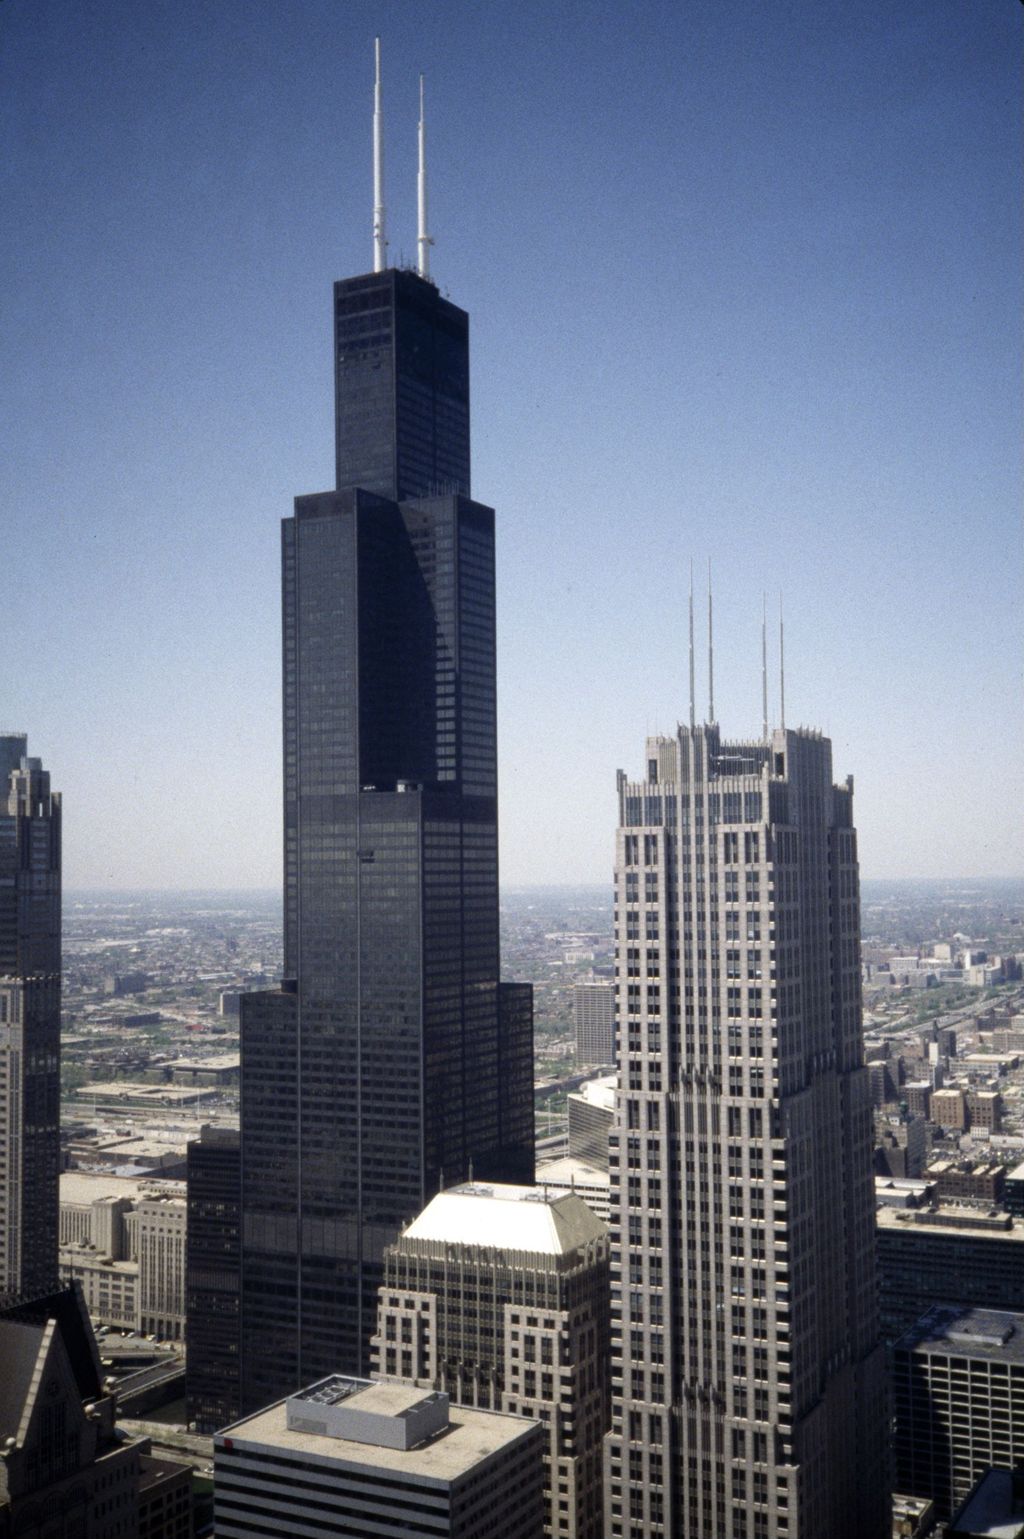 Sears Tower and AT&T Corporate Center